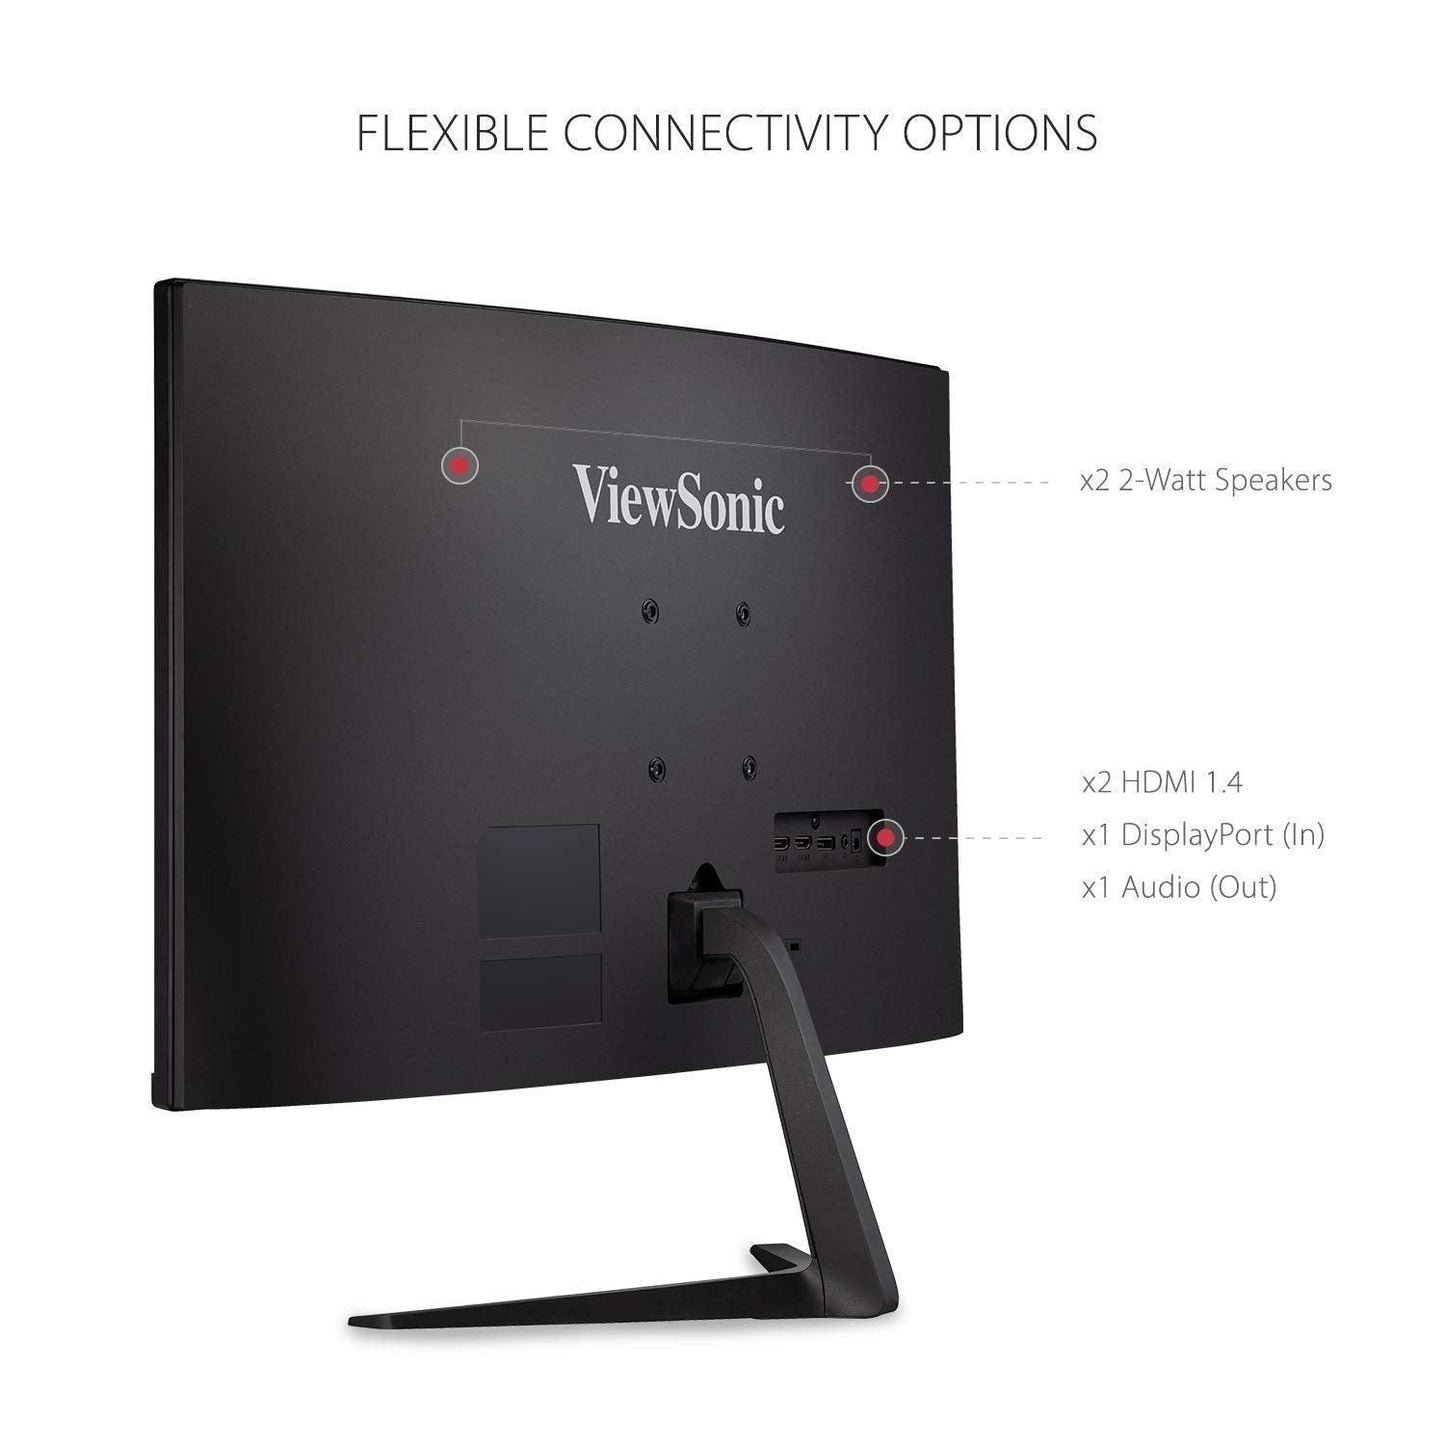 ViewSonic Omni Curved Gaming Monitor VX3218-PC-MHD 81.28 cm (32") VA Panel Full HD (1080), 300 nits, 165Hz - Store For Gamers